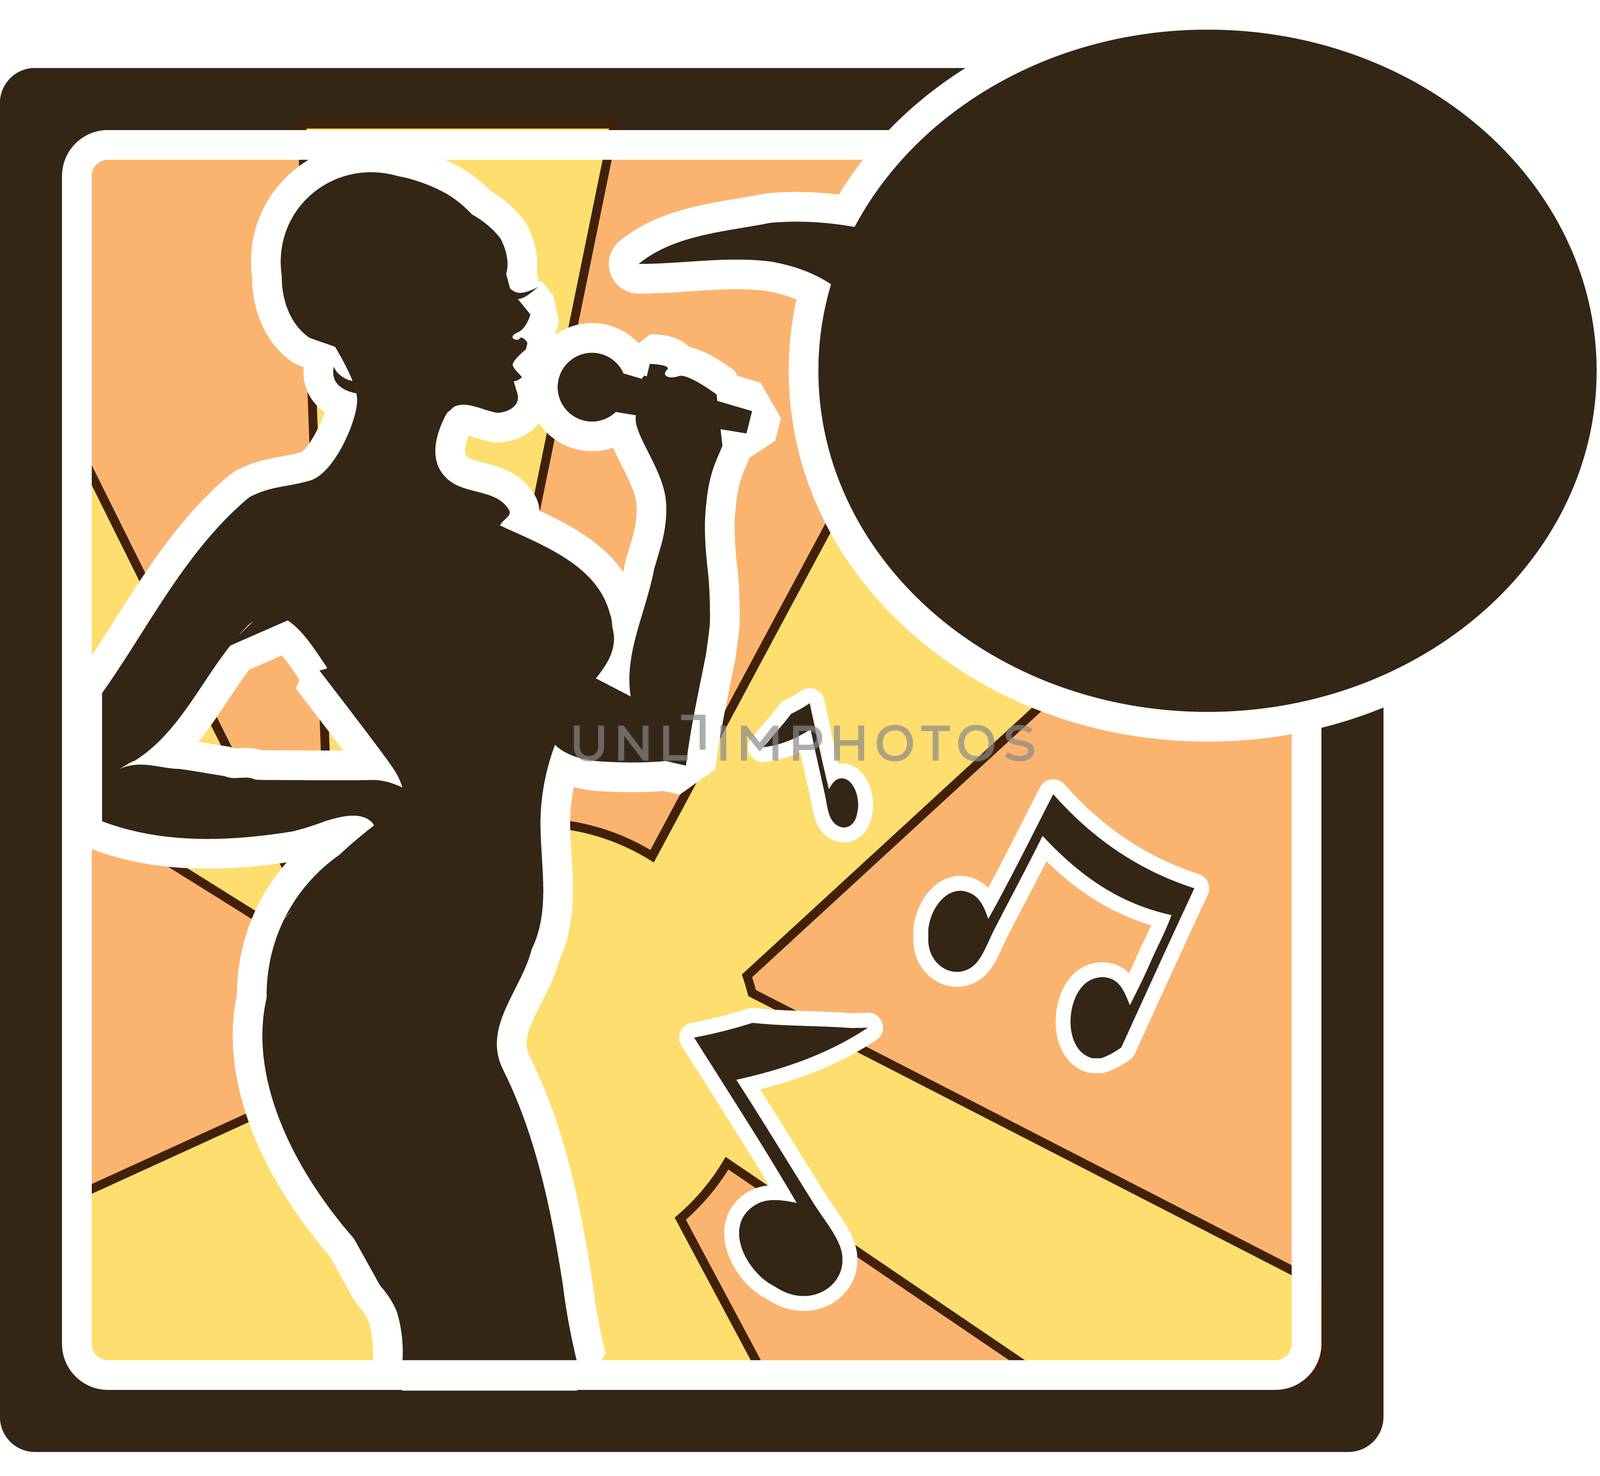 Karaoke woman logo in vector sing song, music silhouette icons,  by IconsJewelry